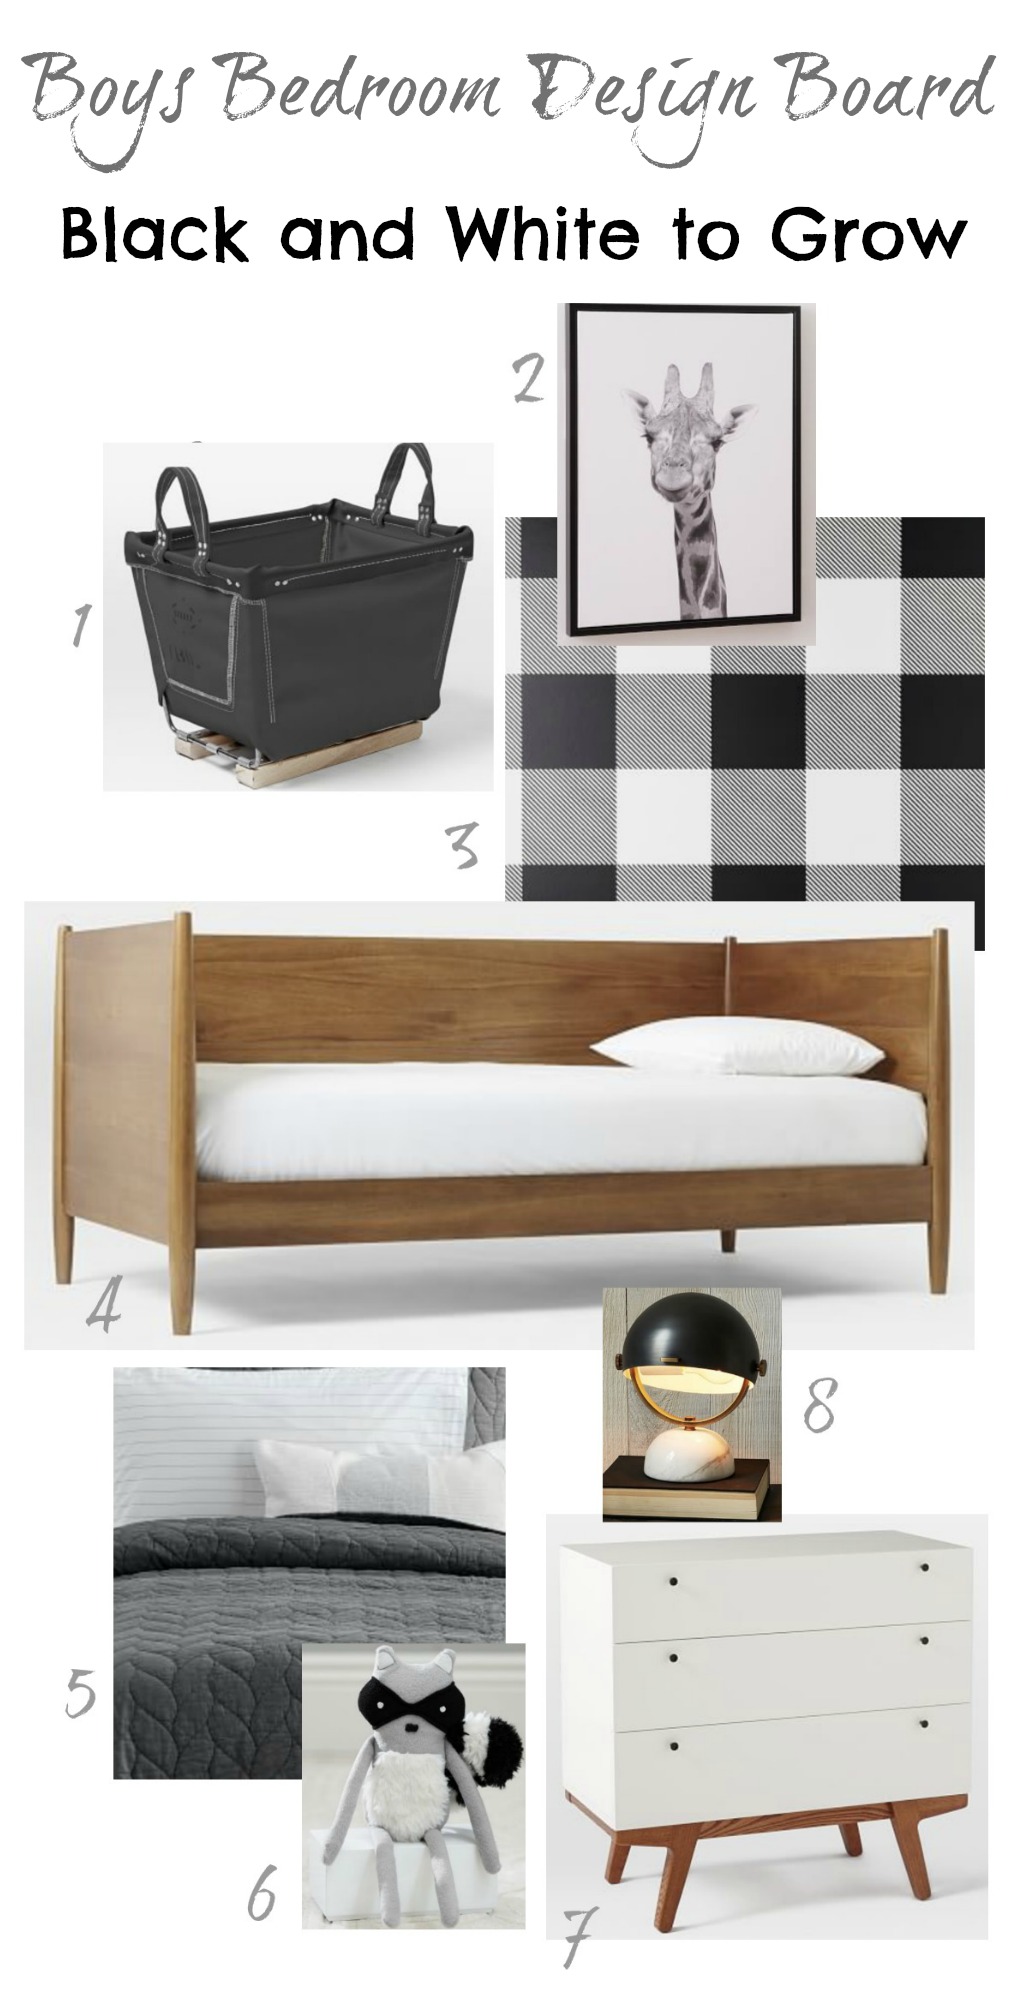 Boys Bedroom Design Board- Black and White to Grow with them!